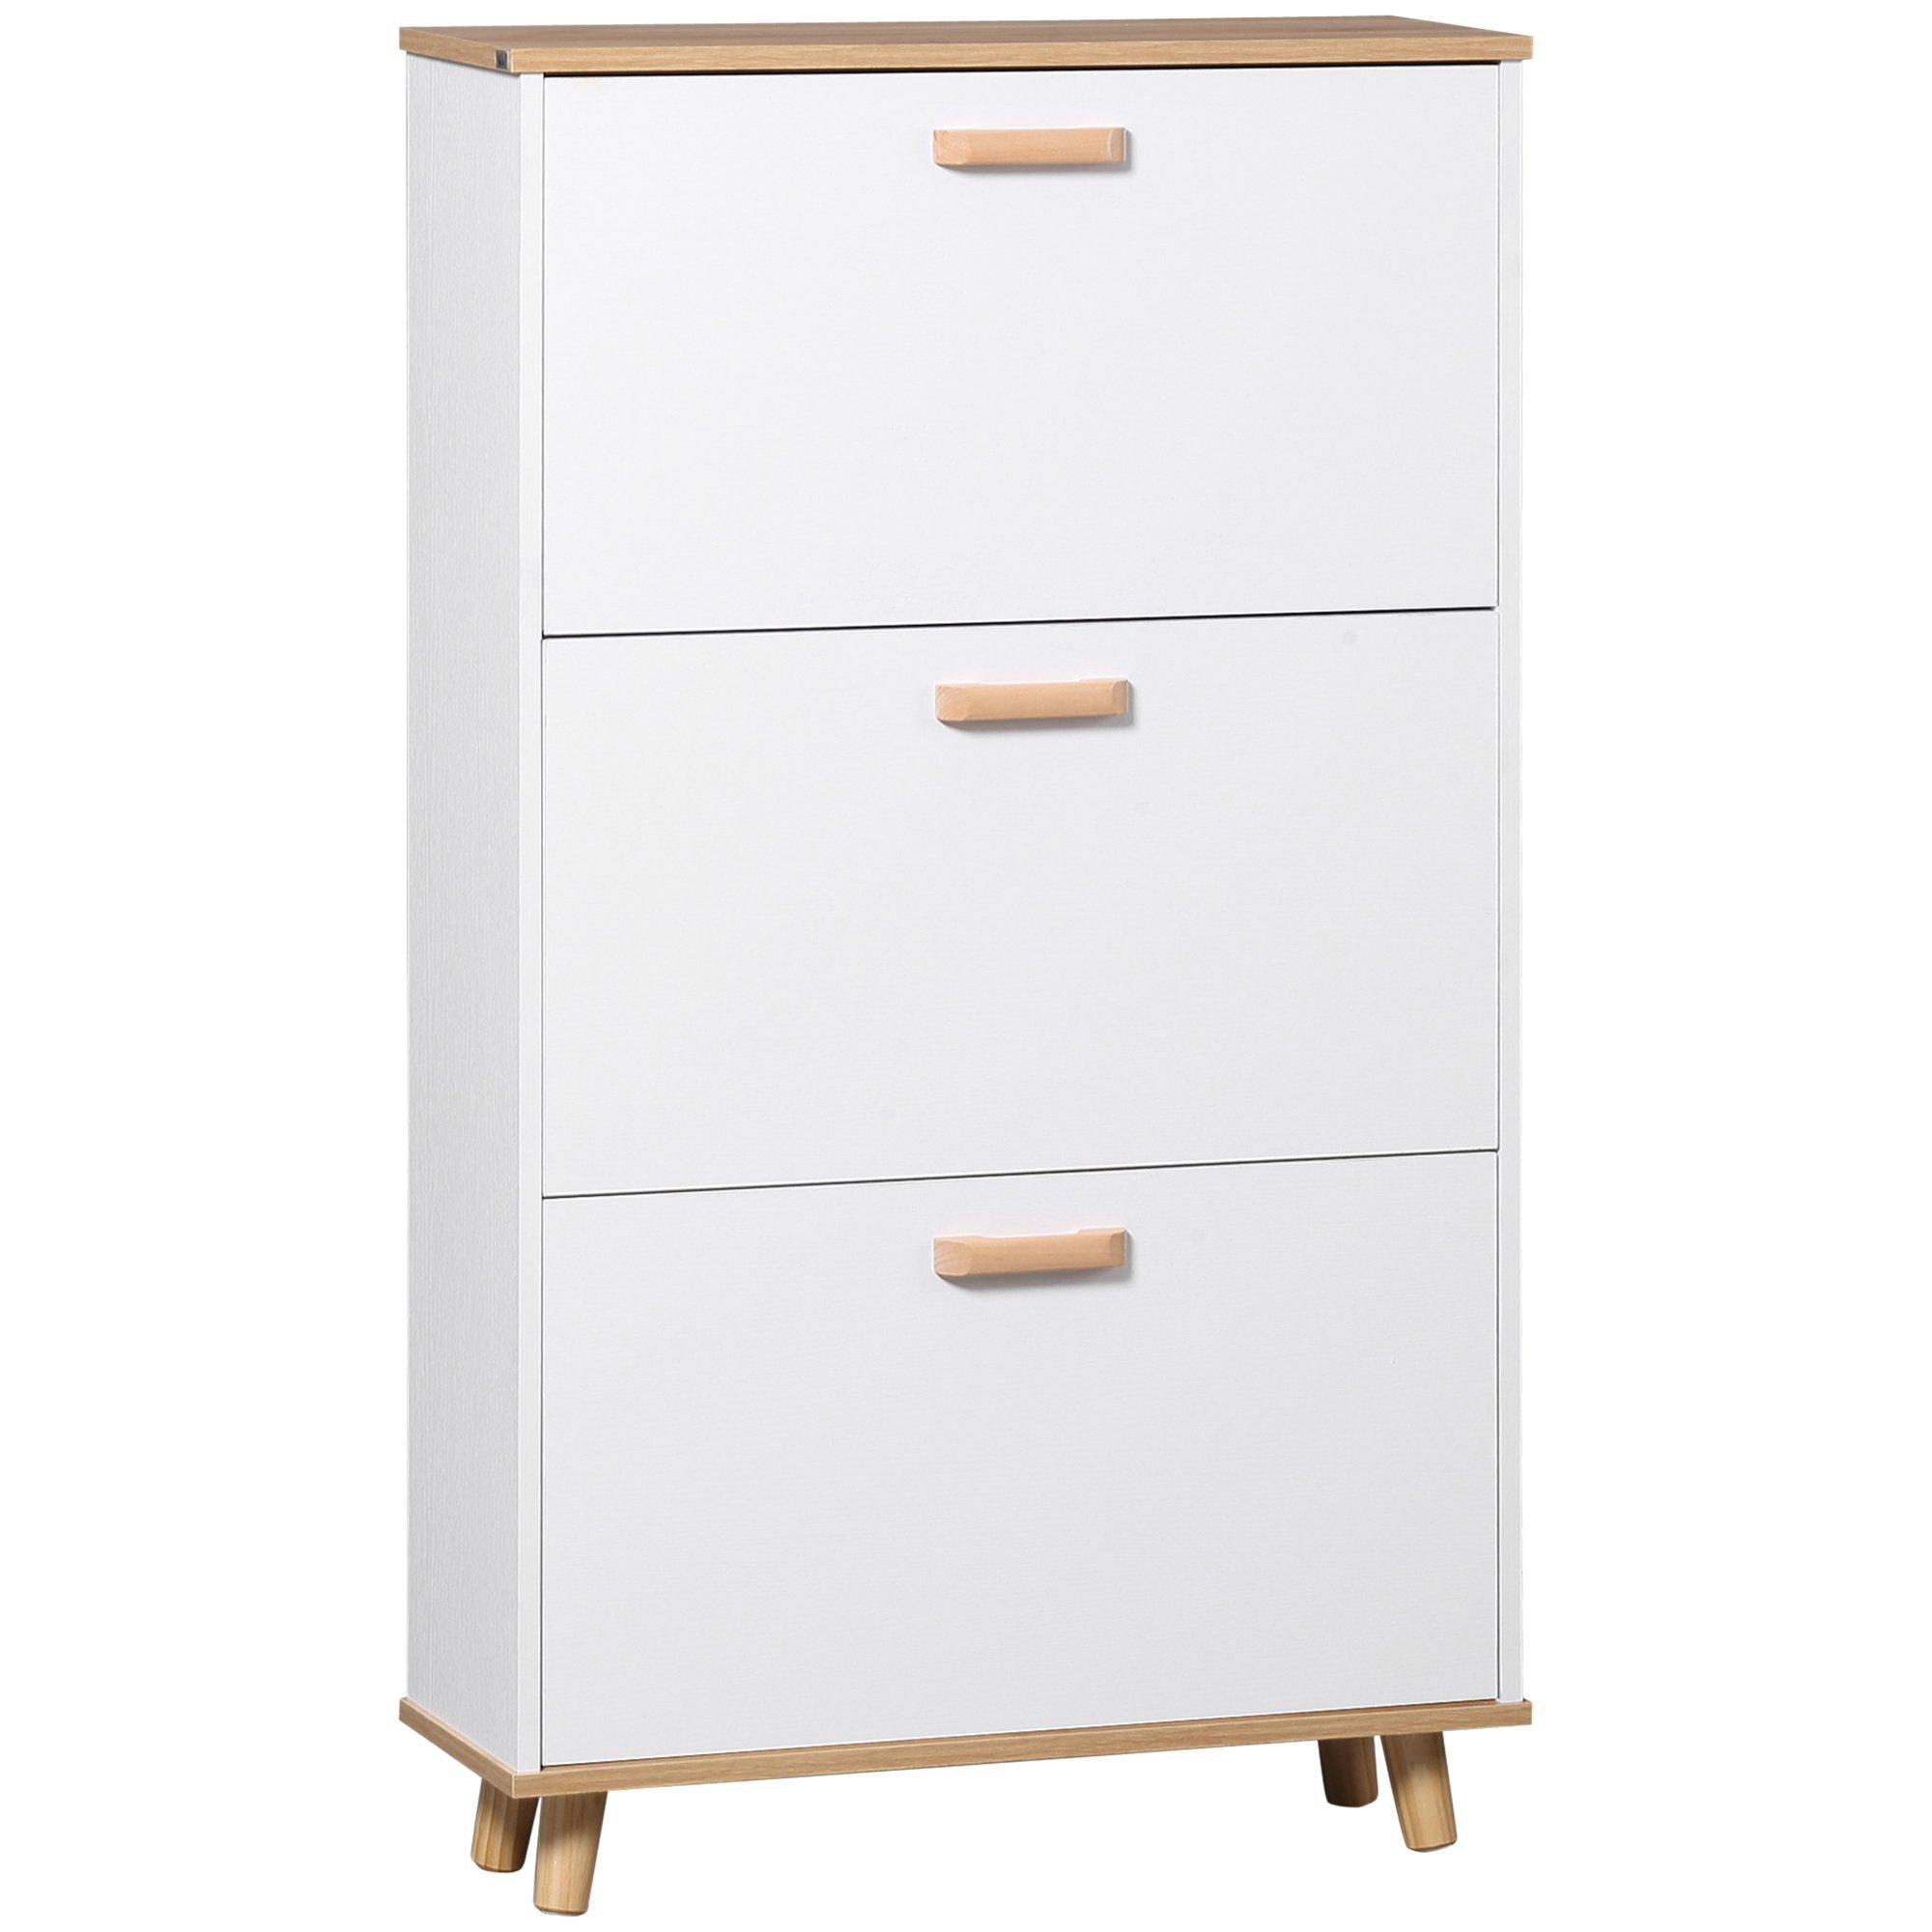 Slim Shoe Storage Cabinet with 3 Drawers and Adjustable Shelves